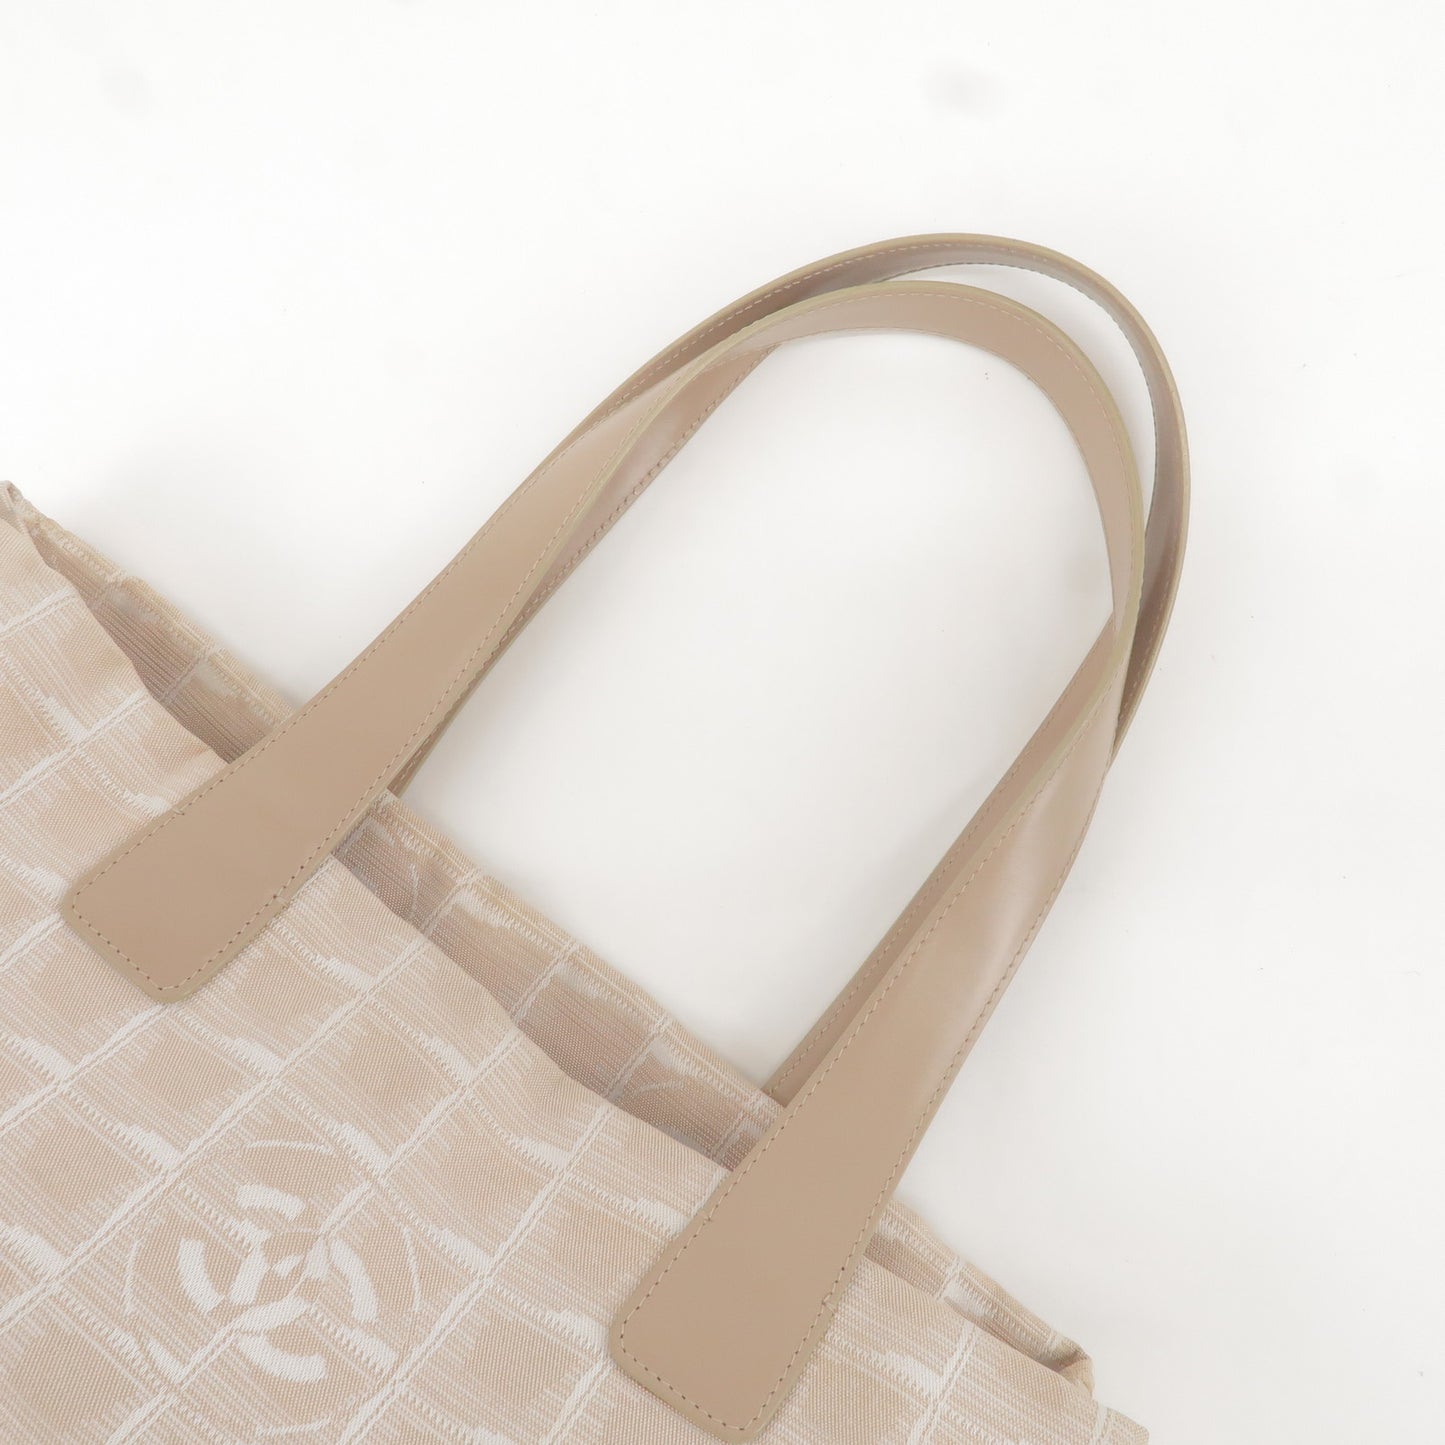 CHANEL Travel Line Nylon Jacquard Leather Tote Bag Beige A15991